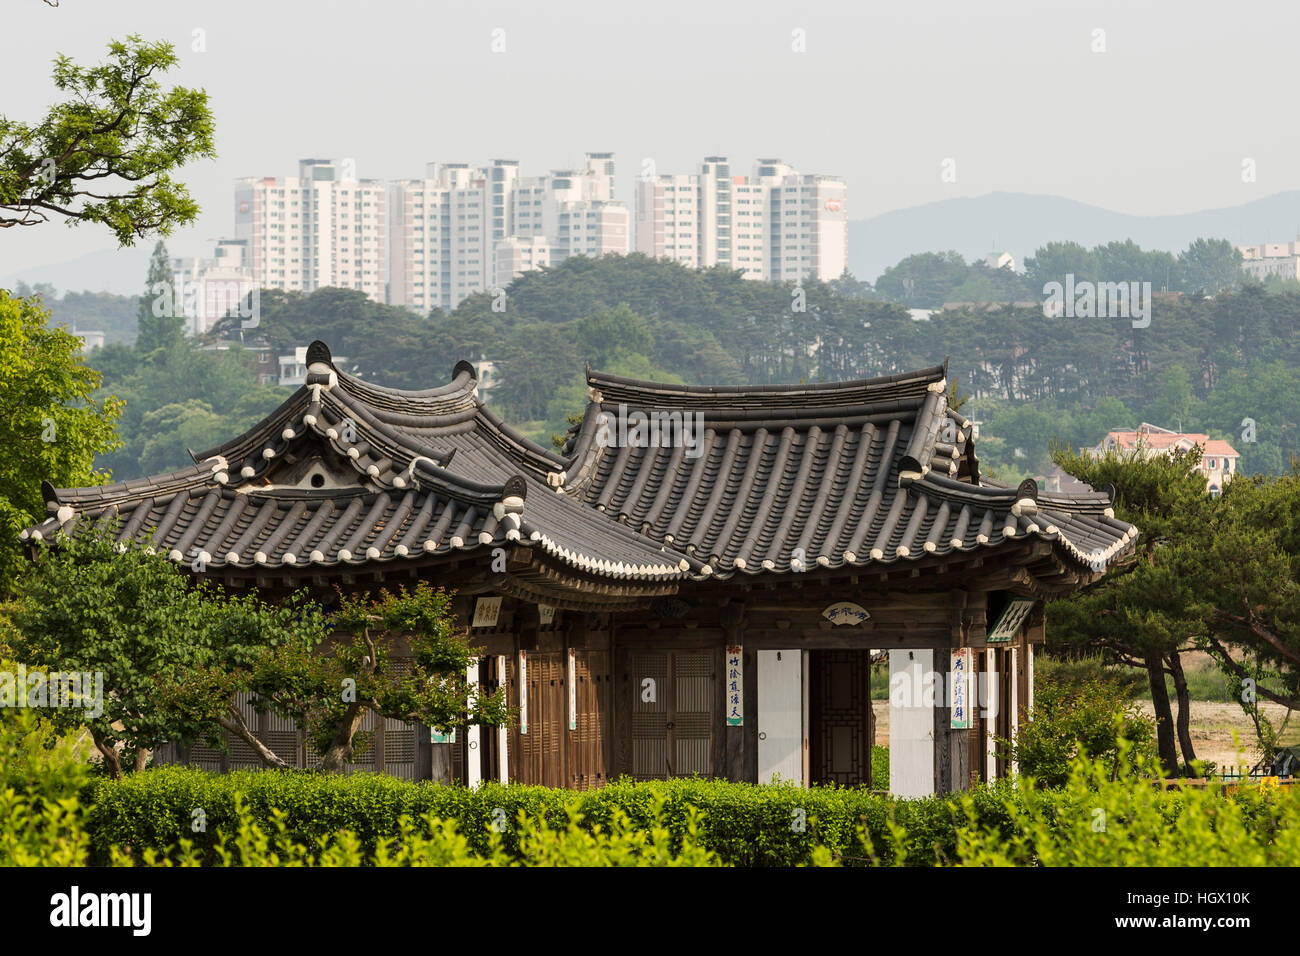 Whallejeong pavillion, now used for visitors to experience a tea ceremony. Gangneung Sunkyojang, Gangneung-si, Gangwon Province, South Korea Stock Photo